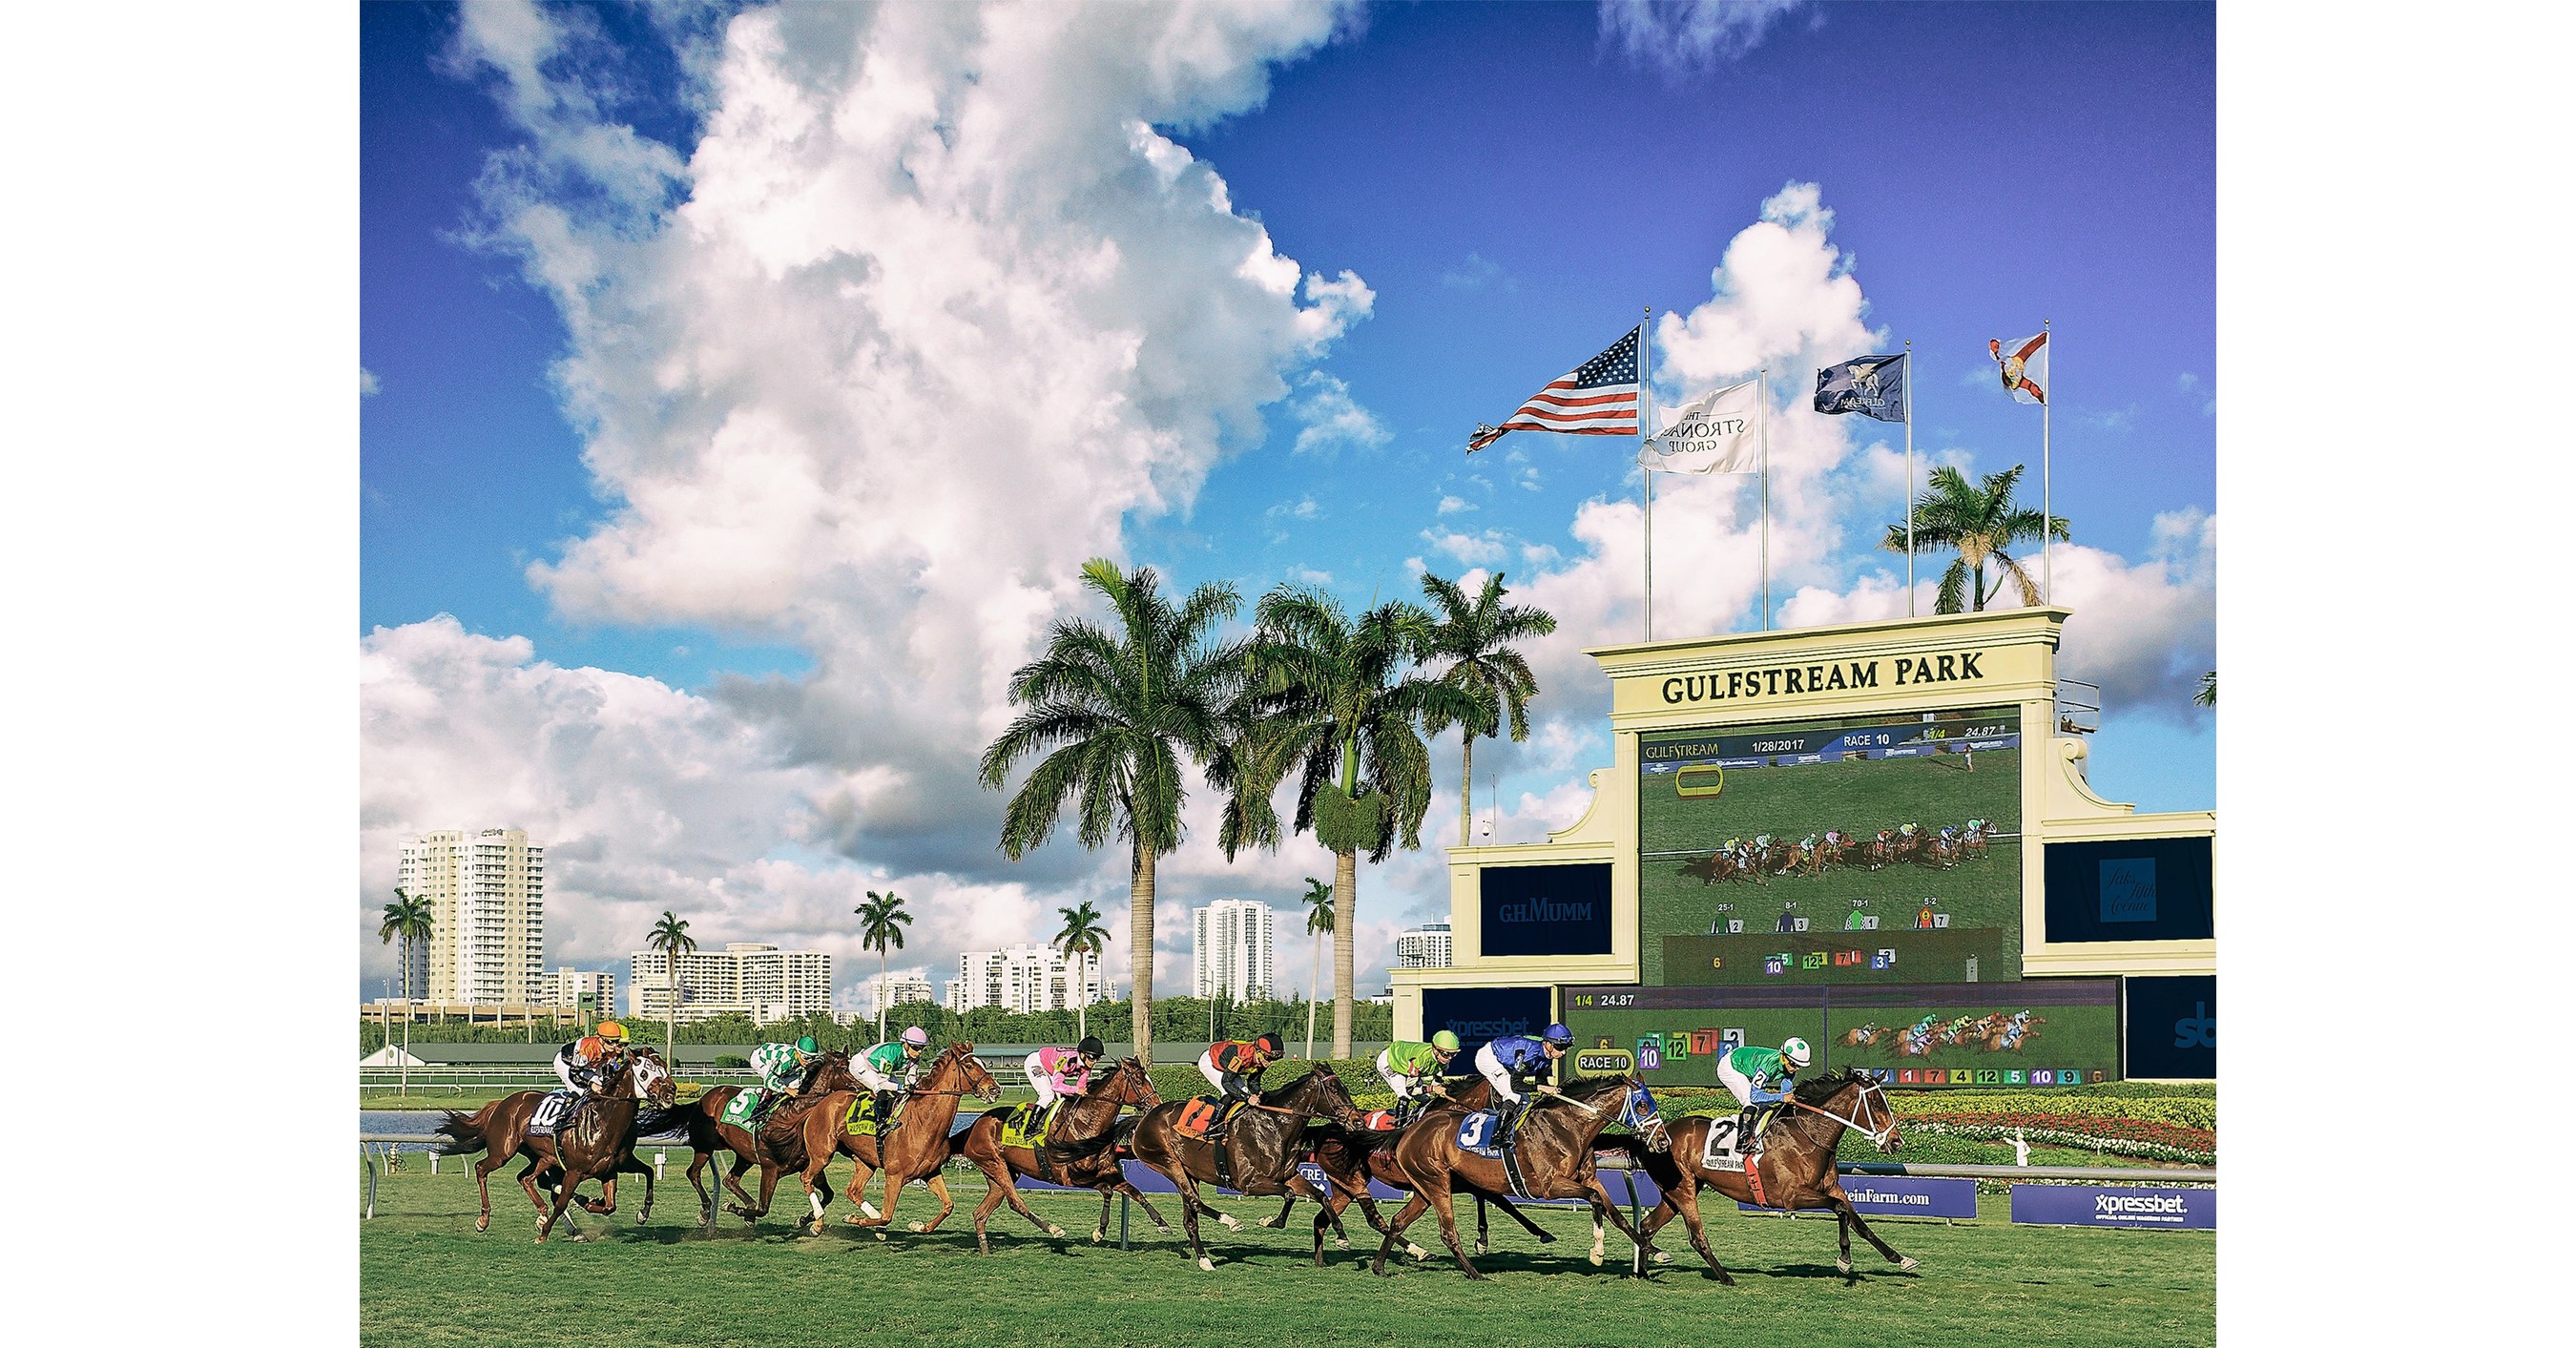 The 16 Million Pegasus World Cup Introduces a Grade 1 Turf Race